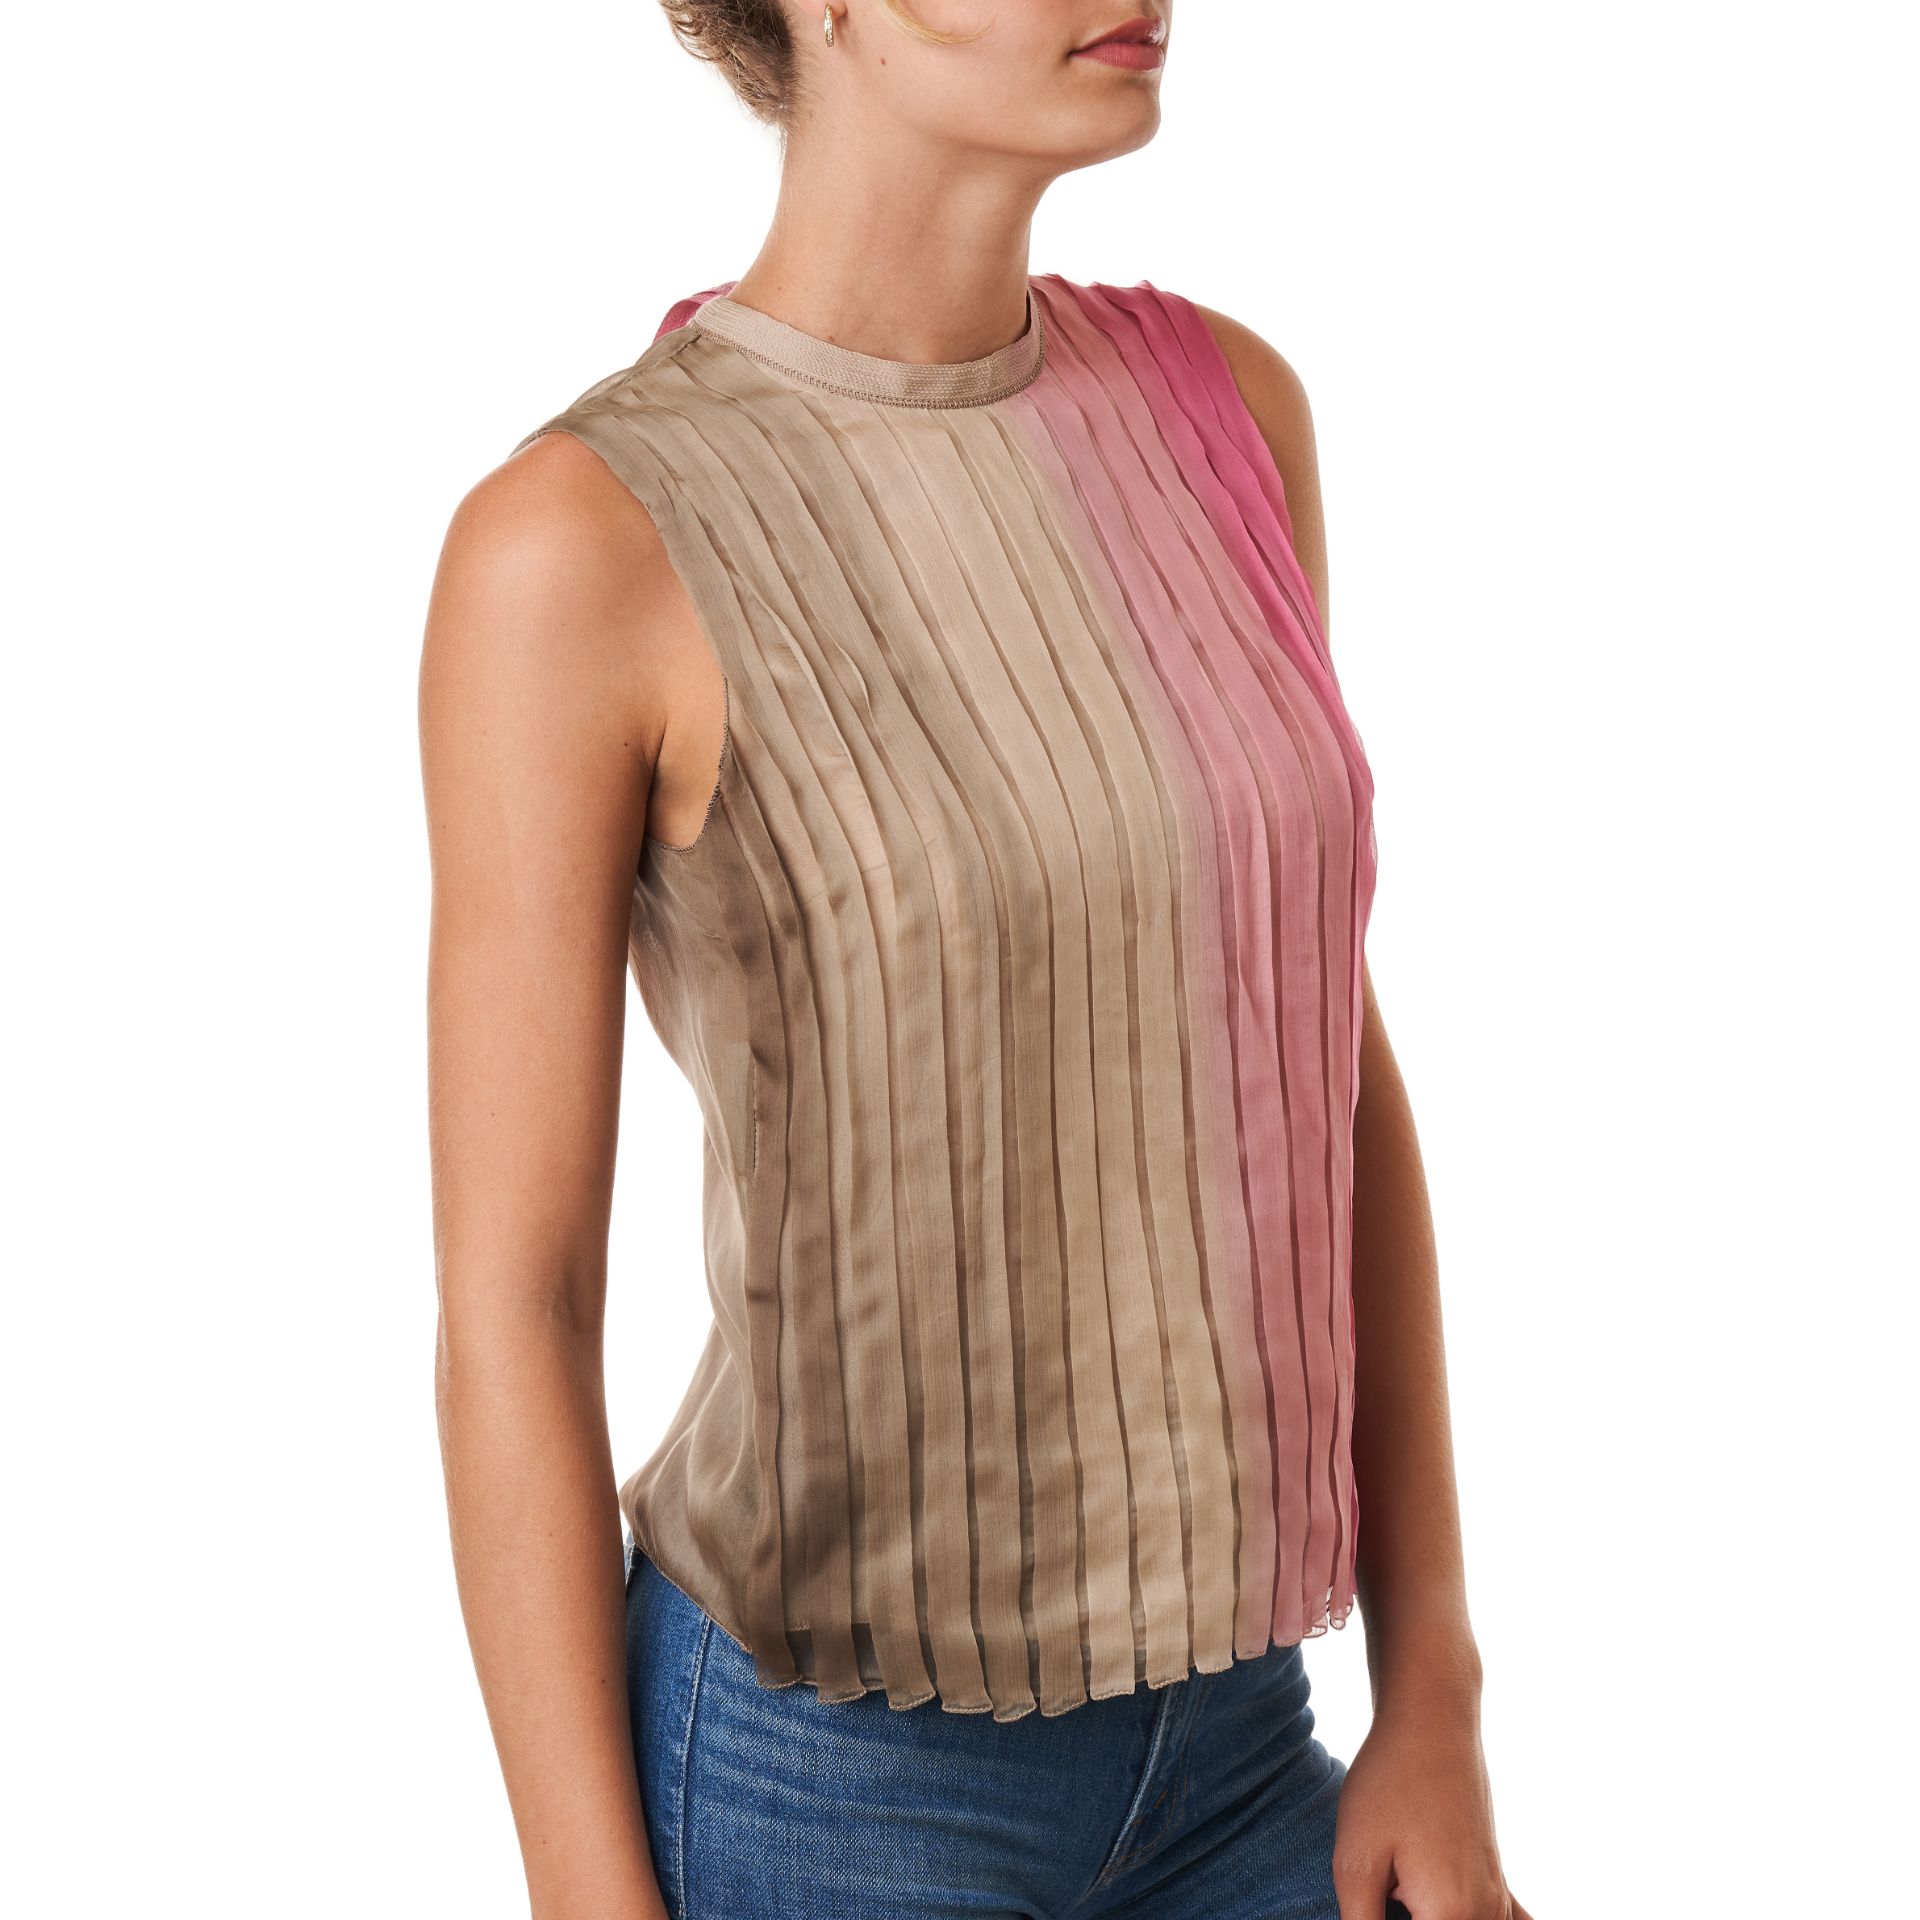 PRADA OMBRE PLEATED TOP Condition grade B. Size Italian 42. 70cm chest, 60cm length. Ombre pink...